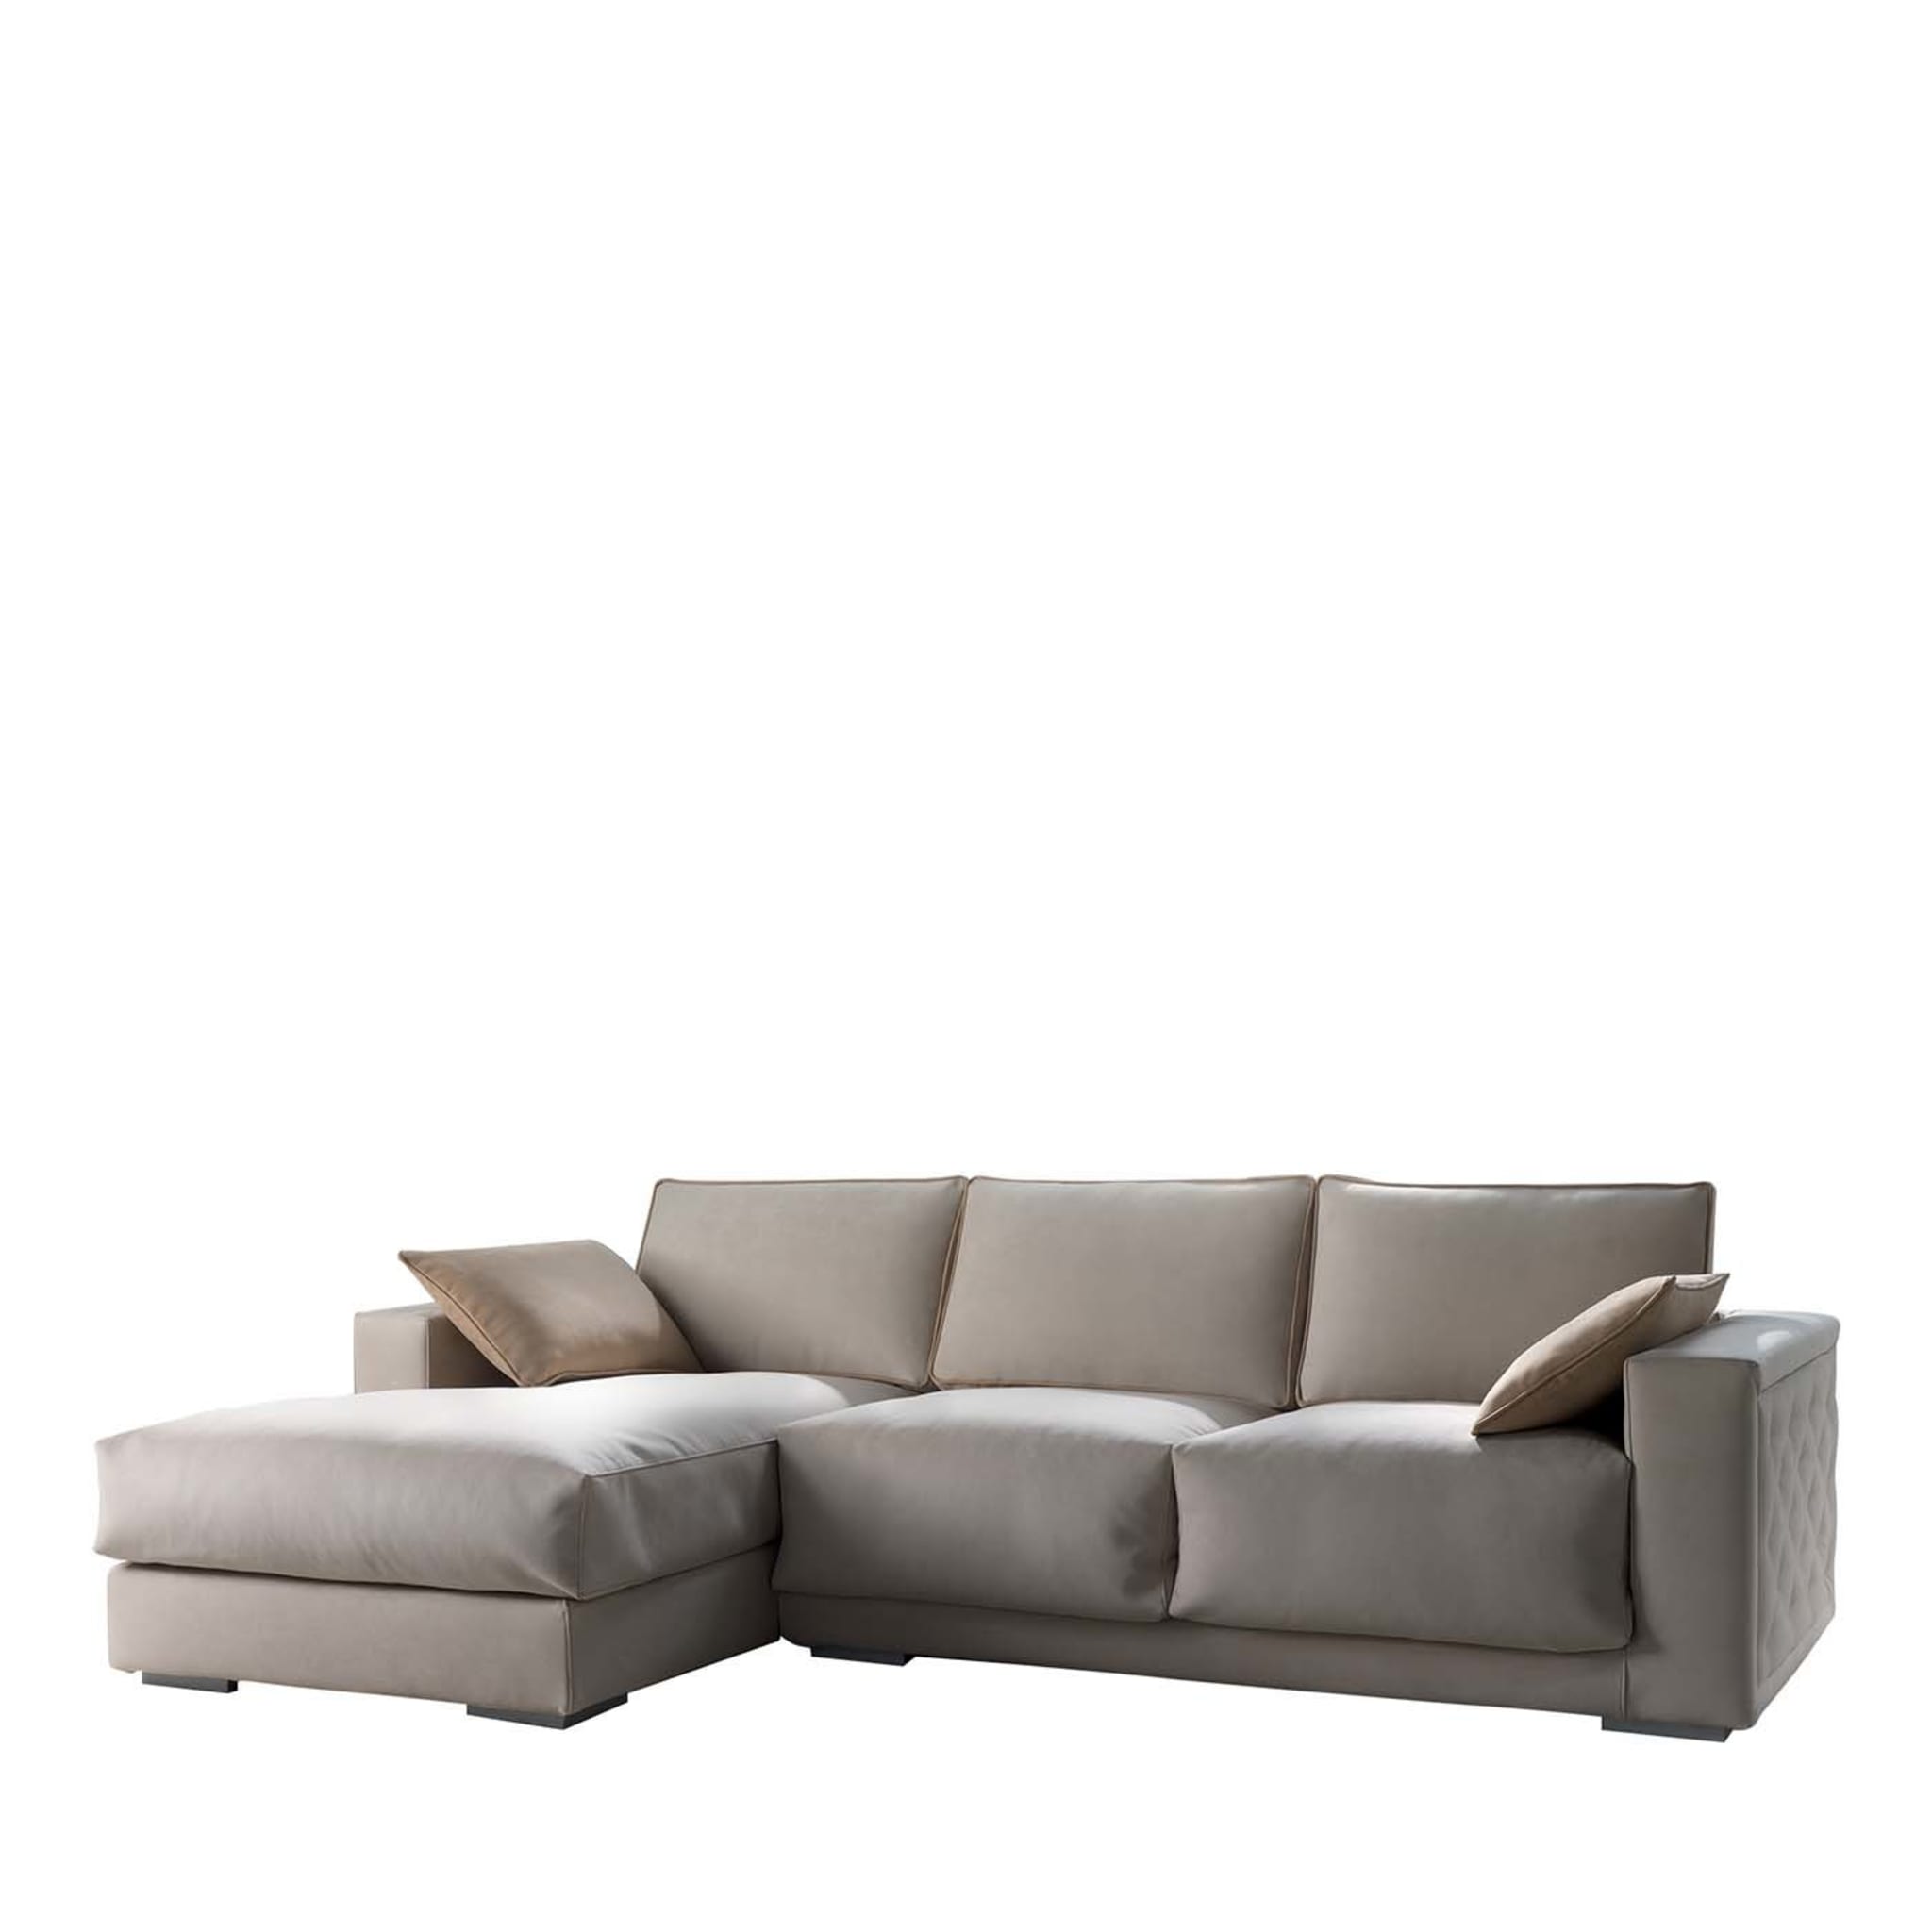 Sofa with Chaise Longue - Main view